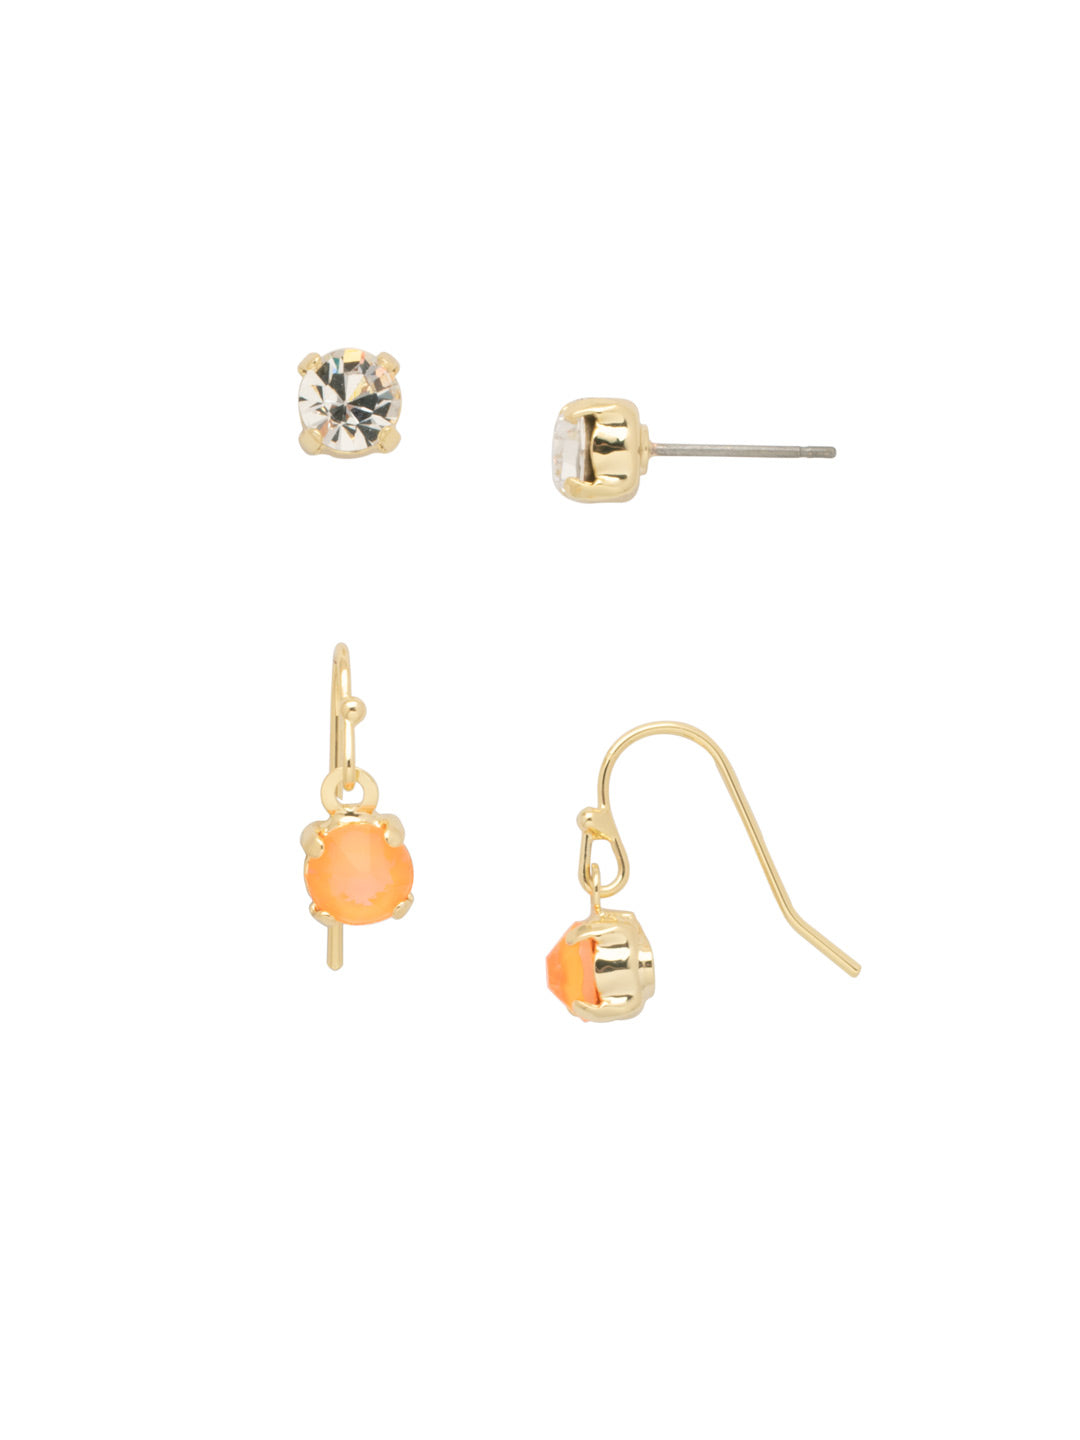 Jayda Set Dangle Earrings - EFM4BGPRT - <p>The Jayda Set Dangle Earrings include a pair of round-cut crystal studs and round-cut crystal dangle earrings, both dainty enough to wear together on the ear. From Sorrelli's Portofino collection in our Bright Gold-tone finish.</p>